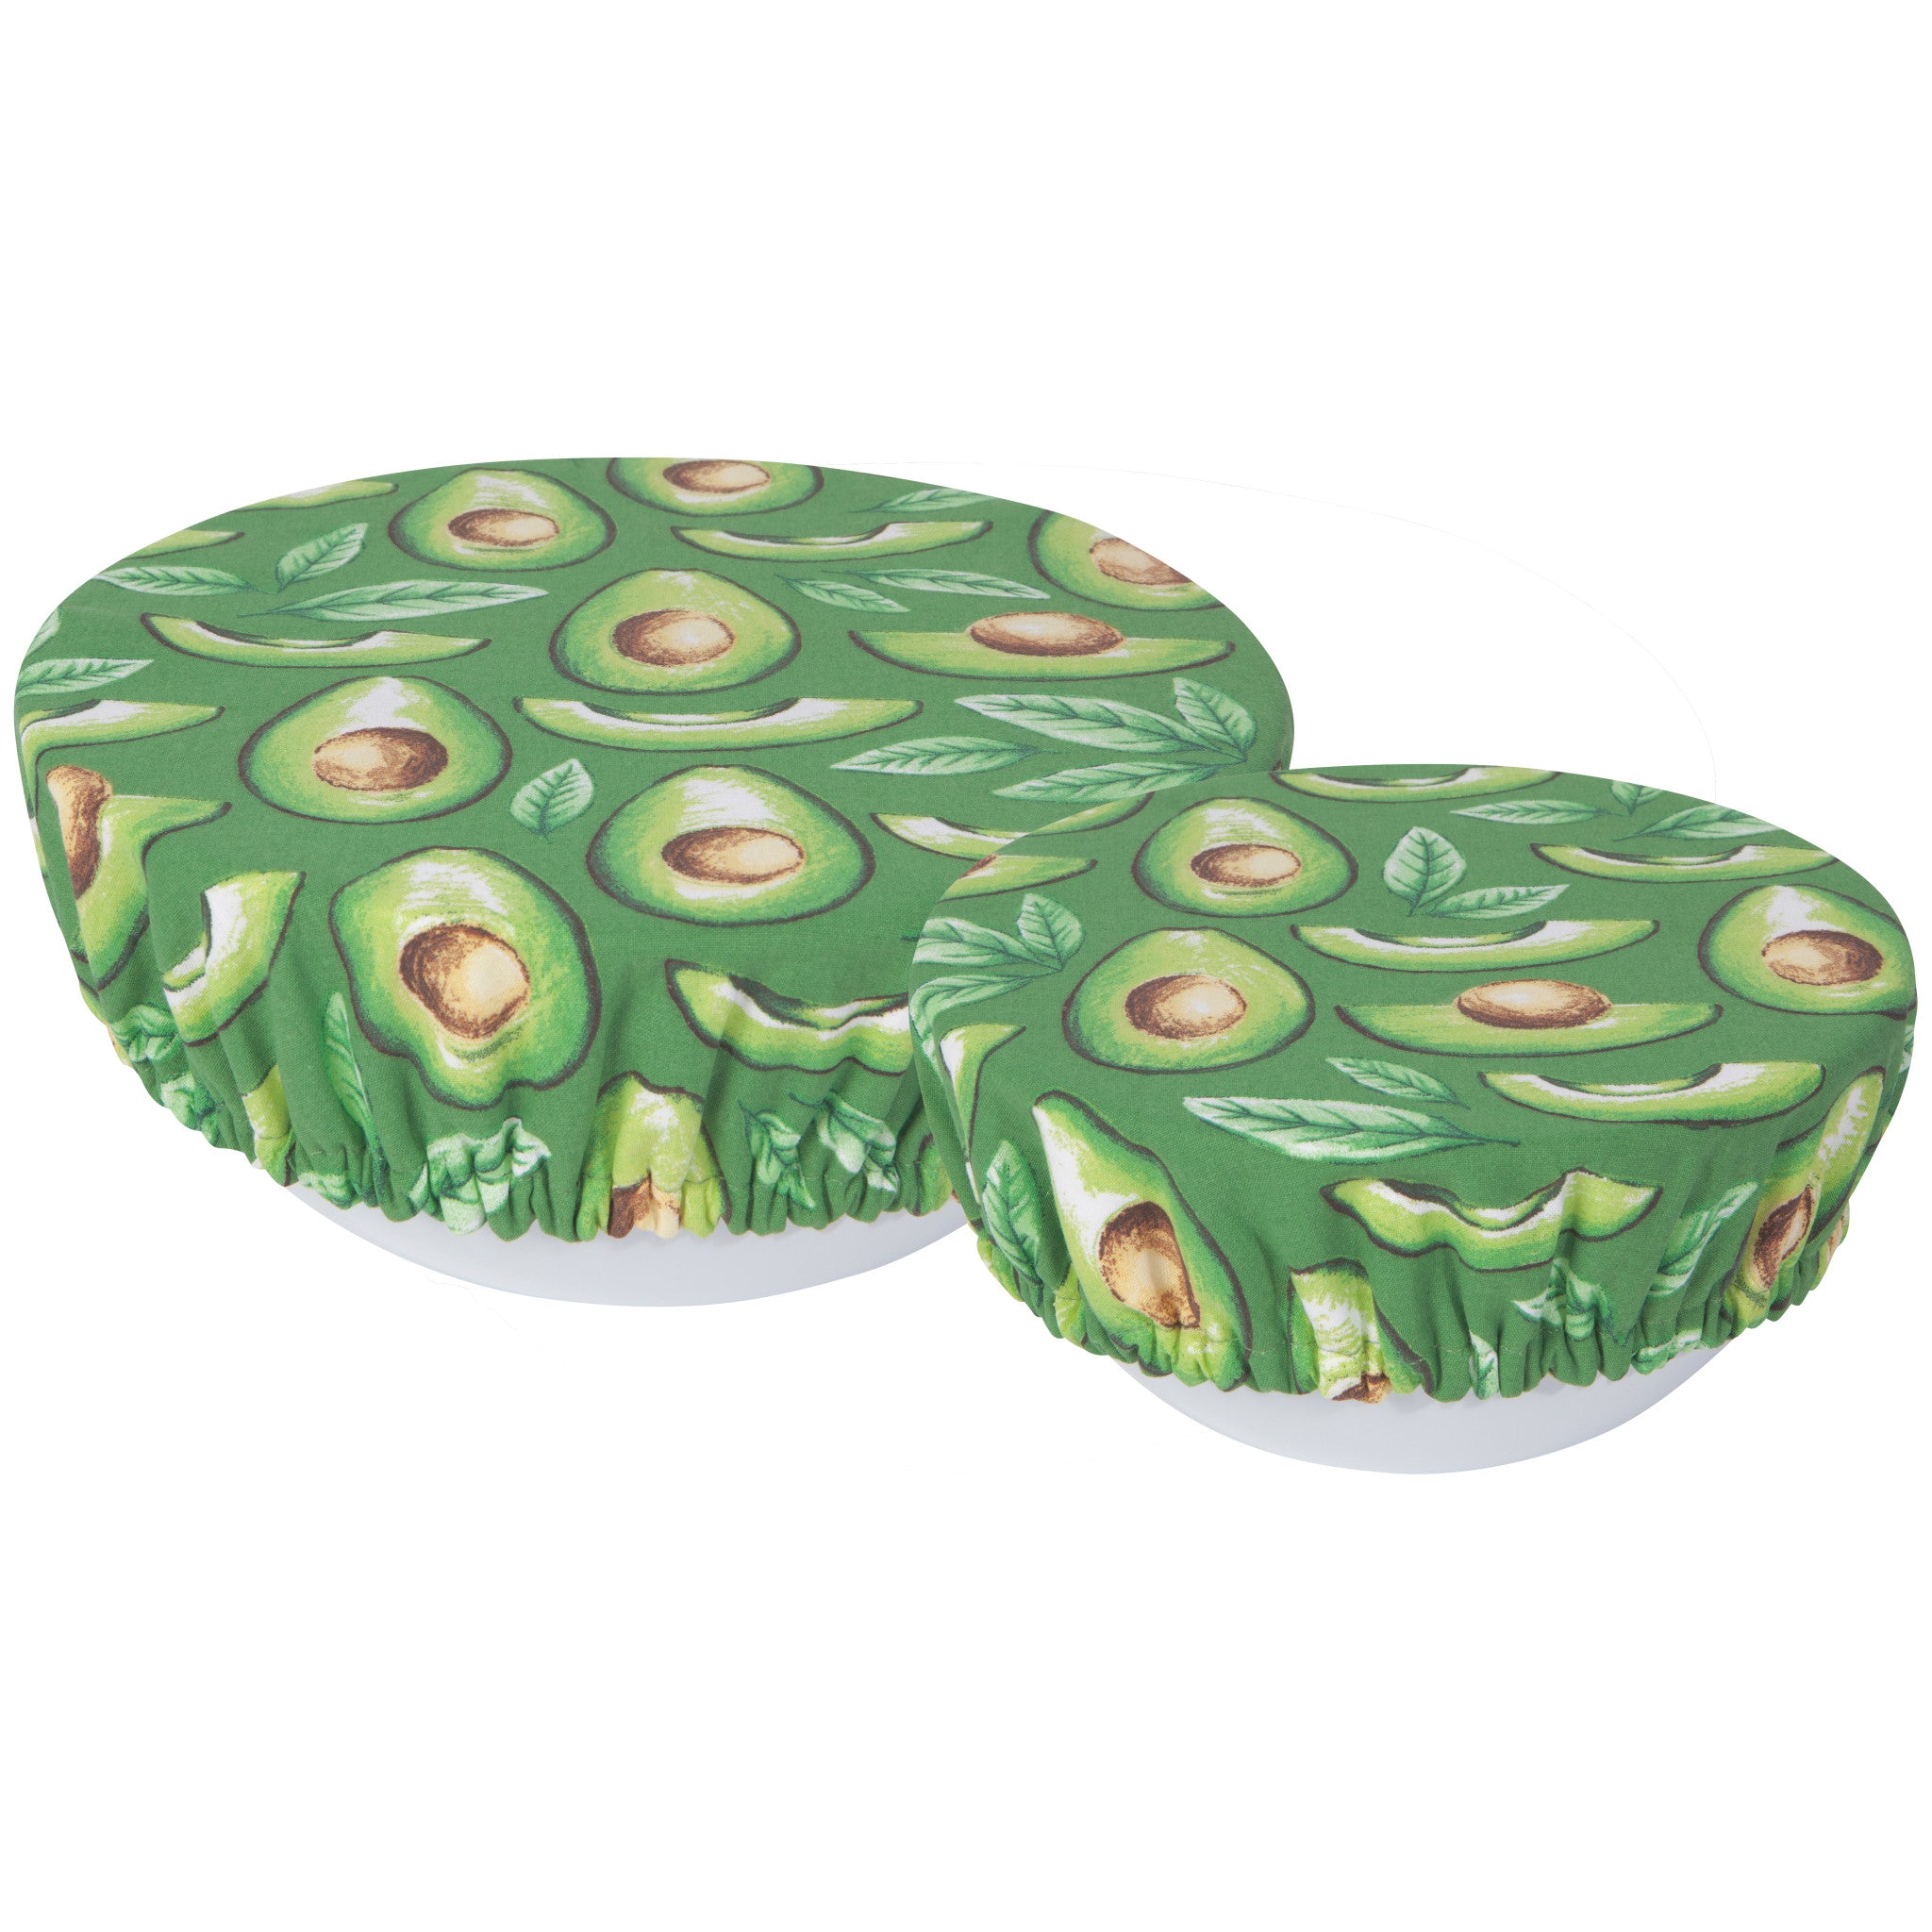 Bowl Cover Set of 2